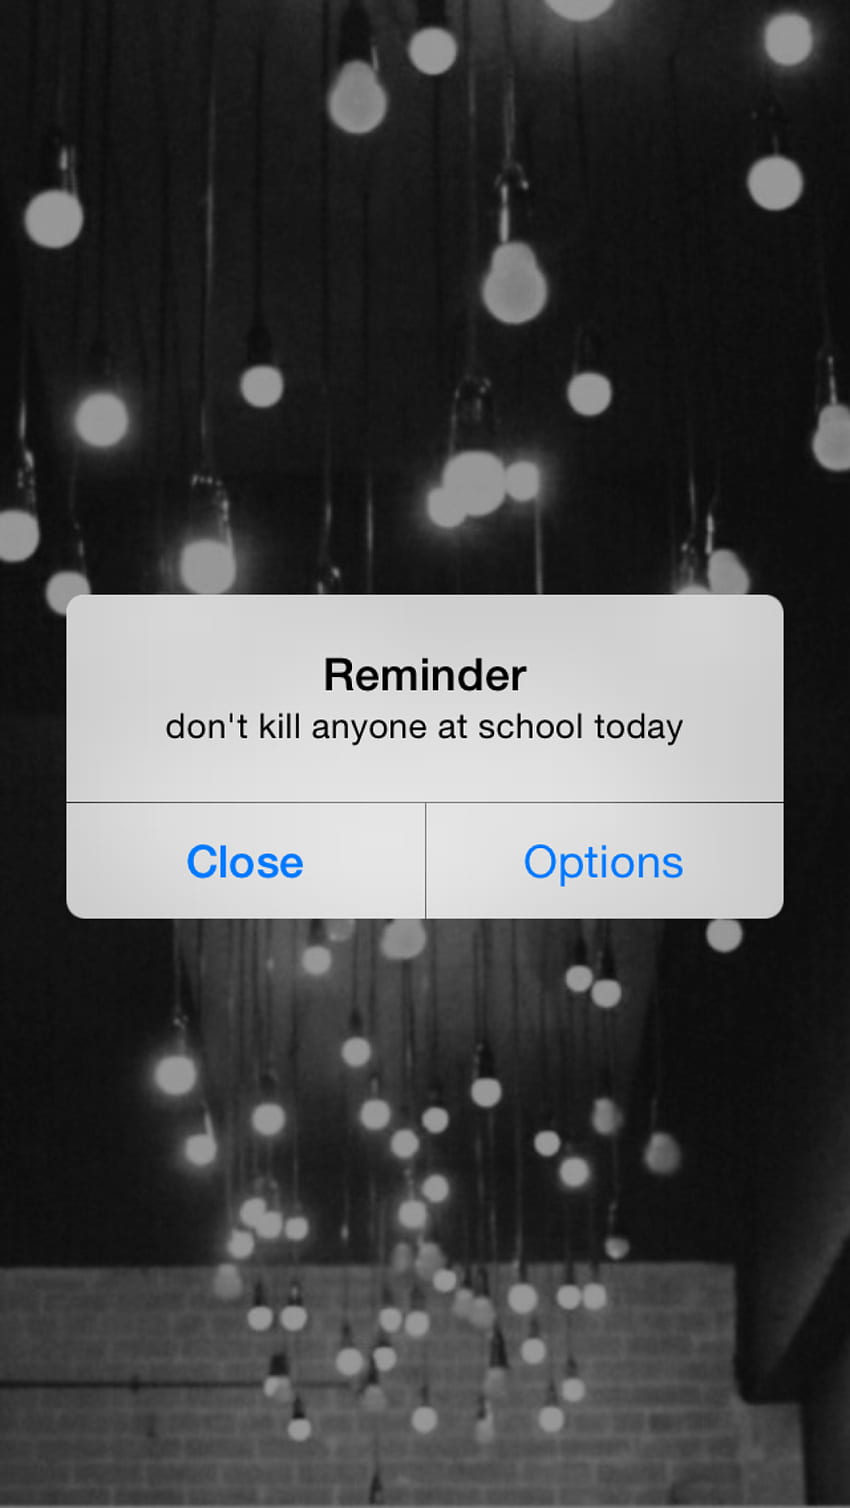 A reminder pops up on a phone screen that says 